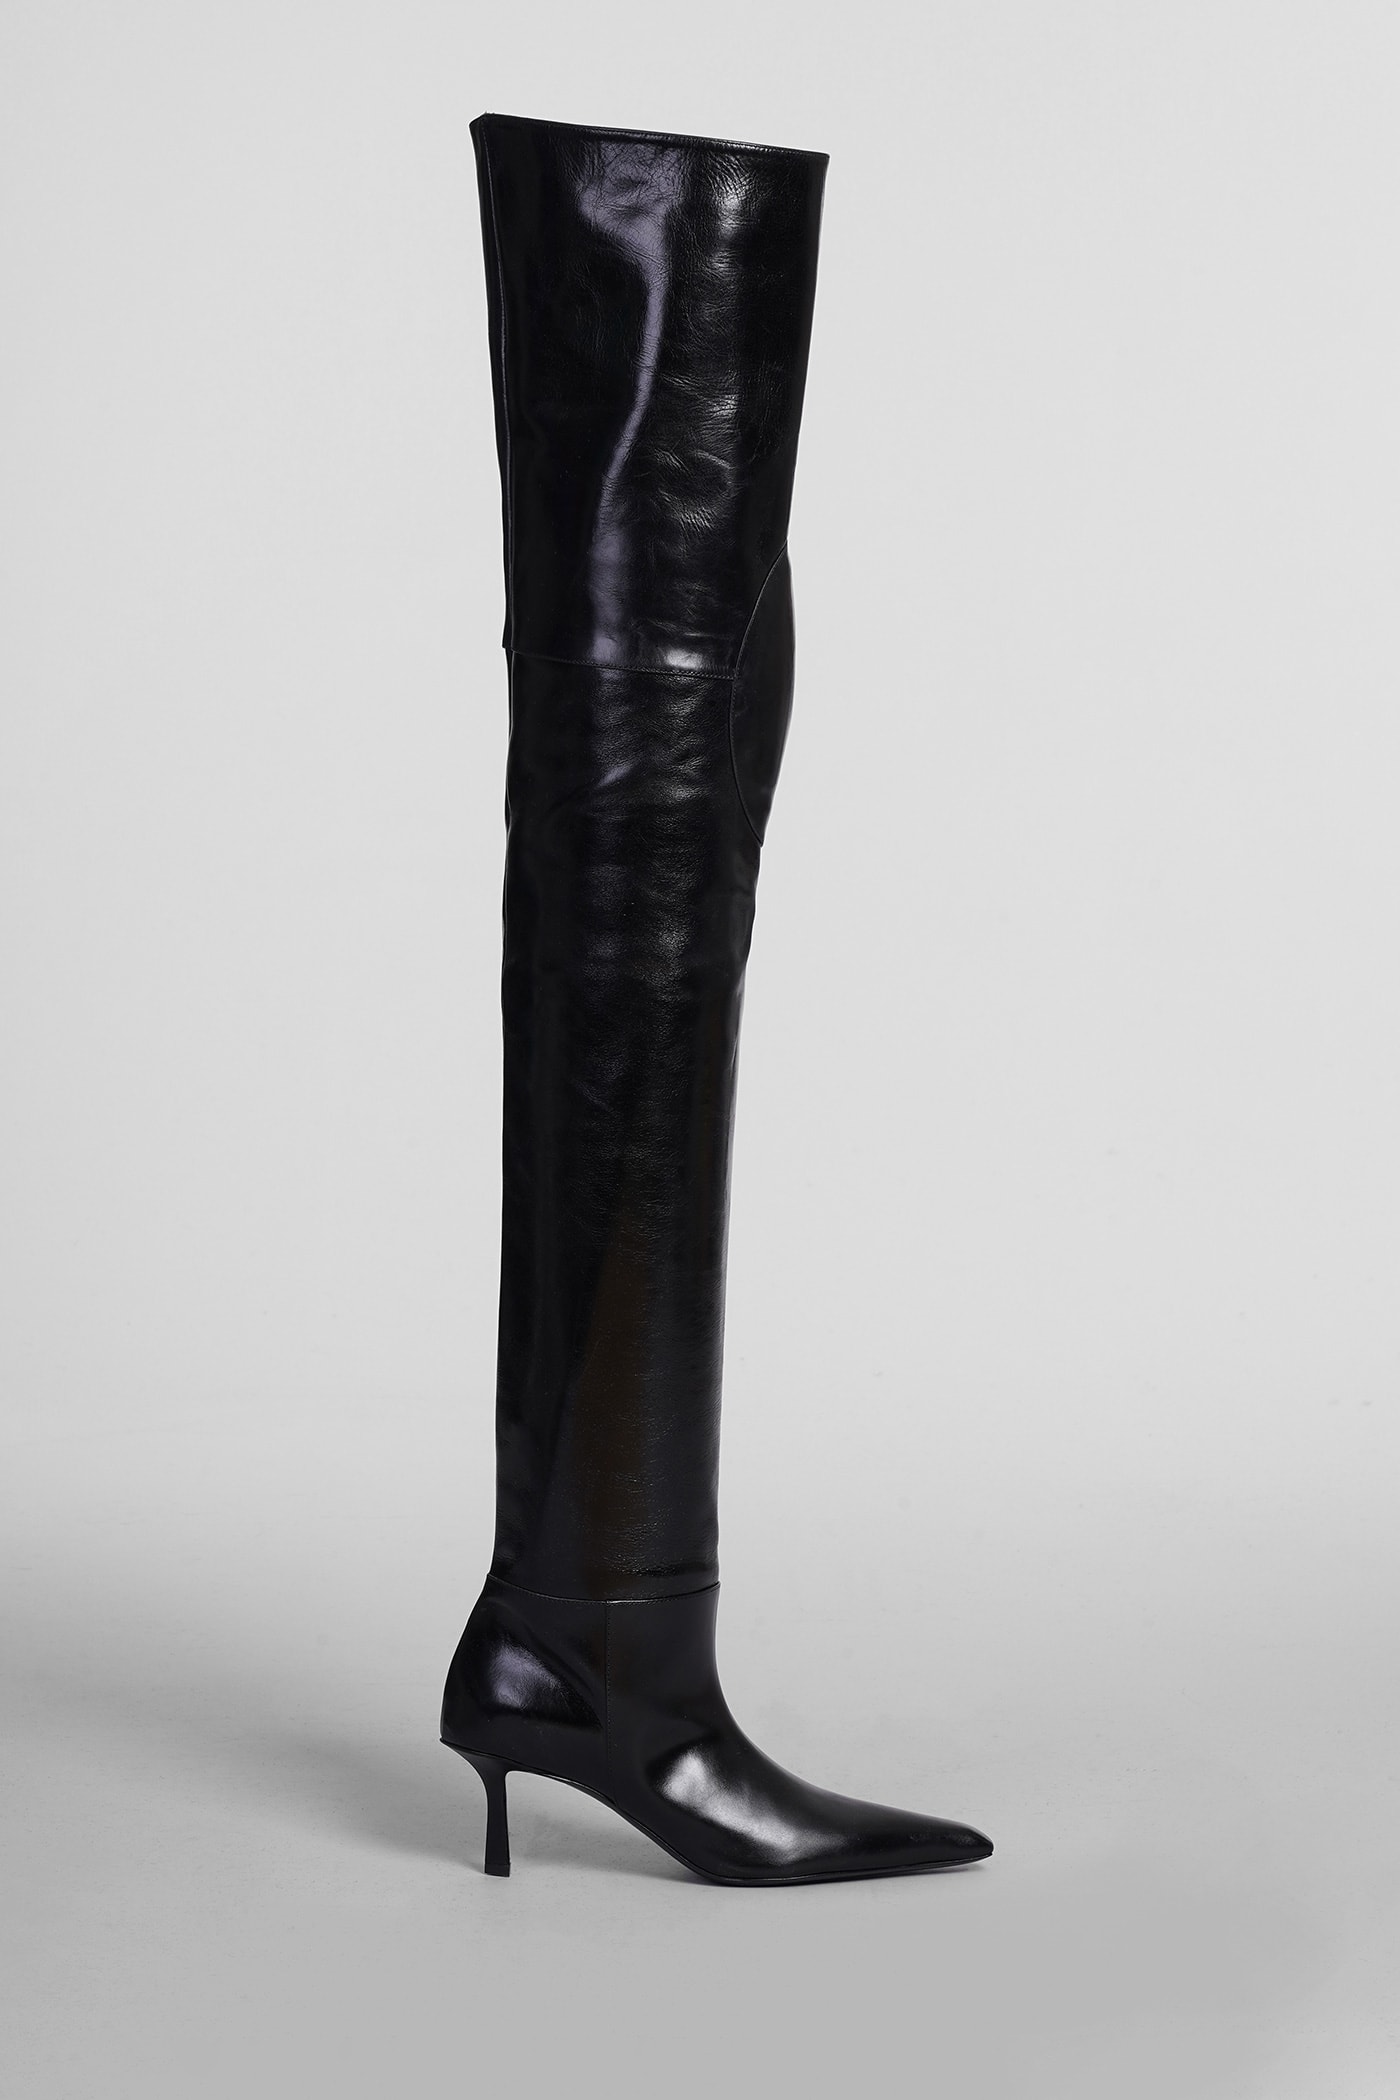 Alexander Wang High Heels Boots In Black Leather